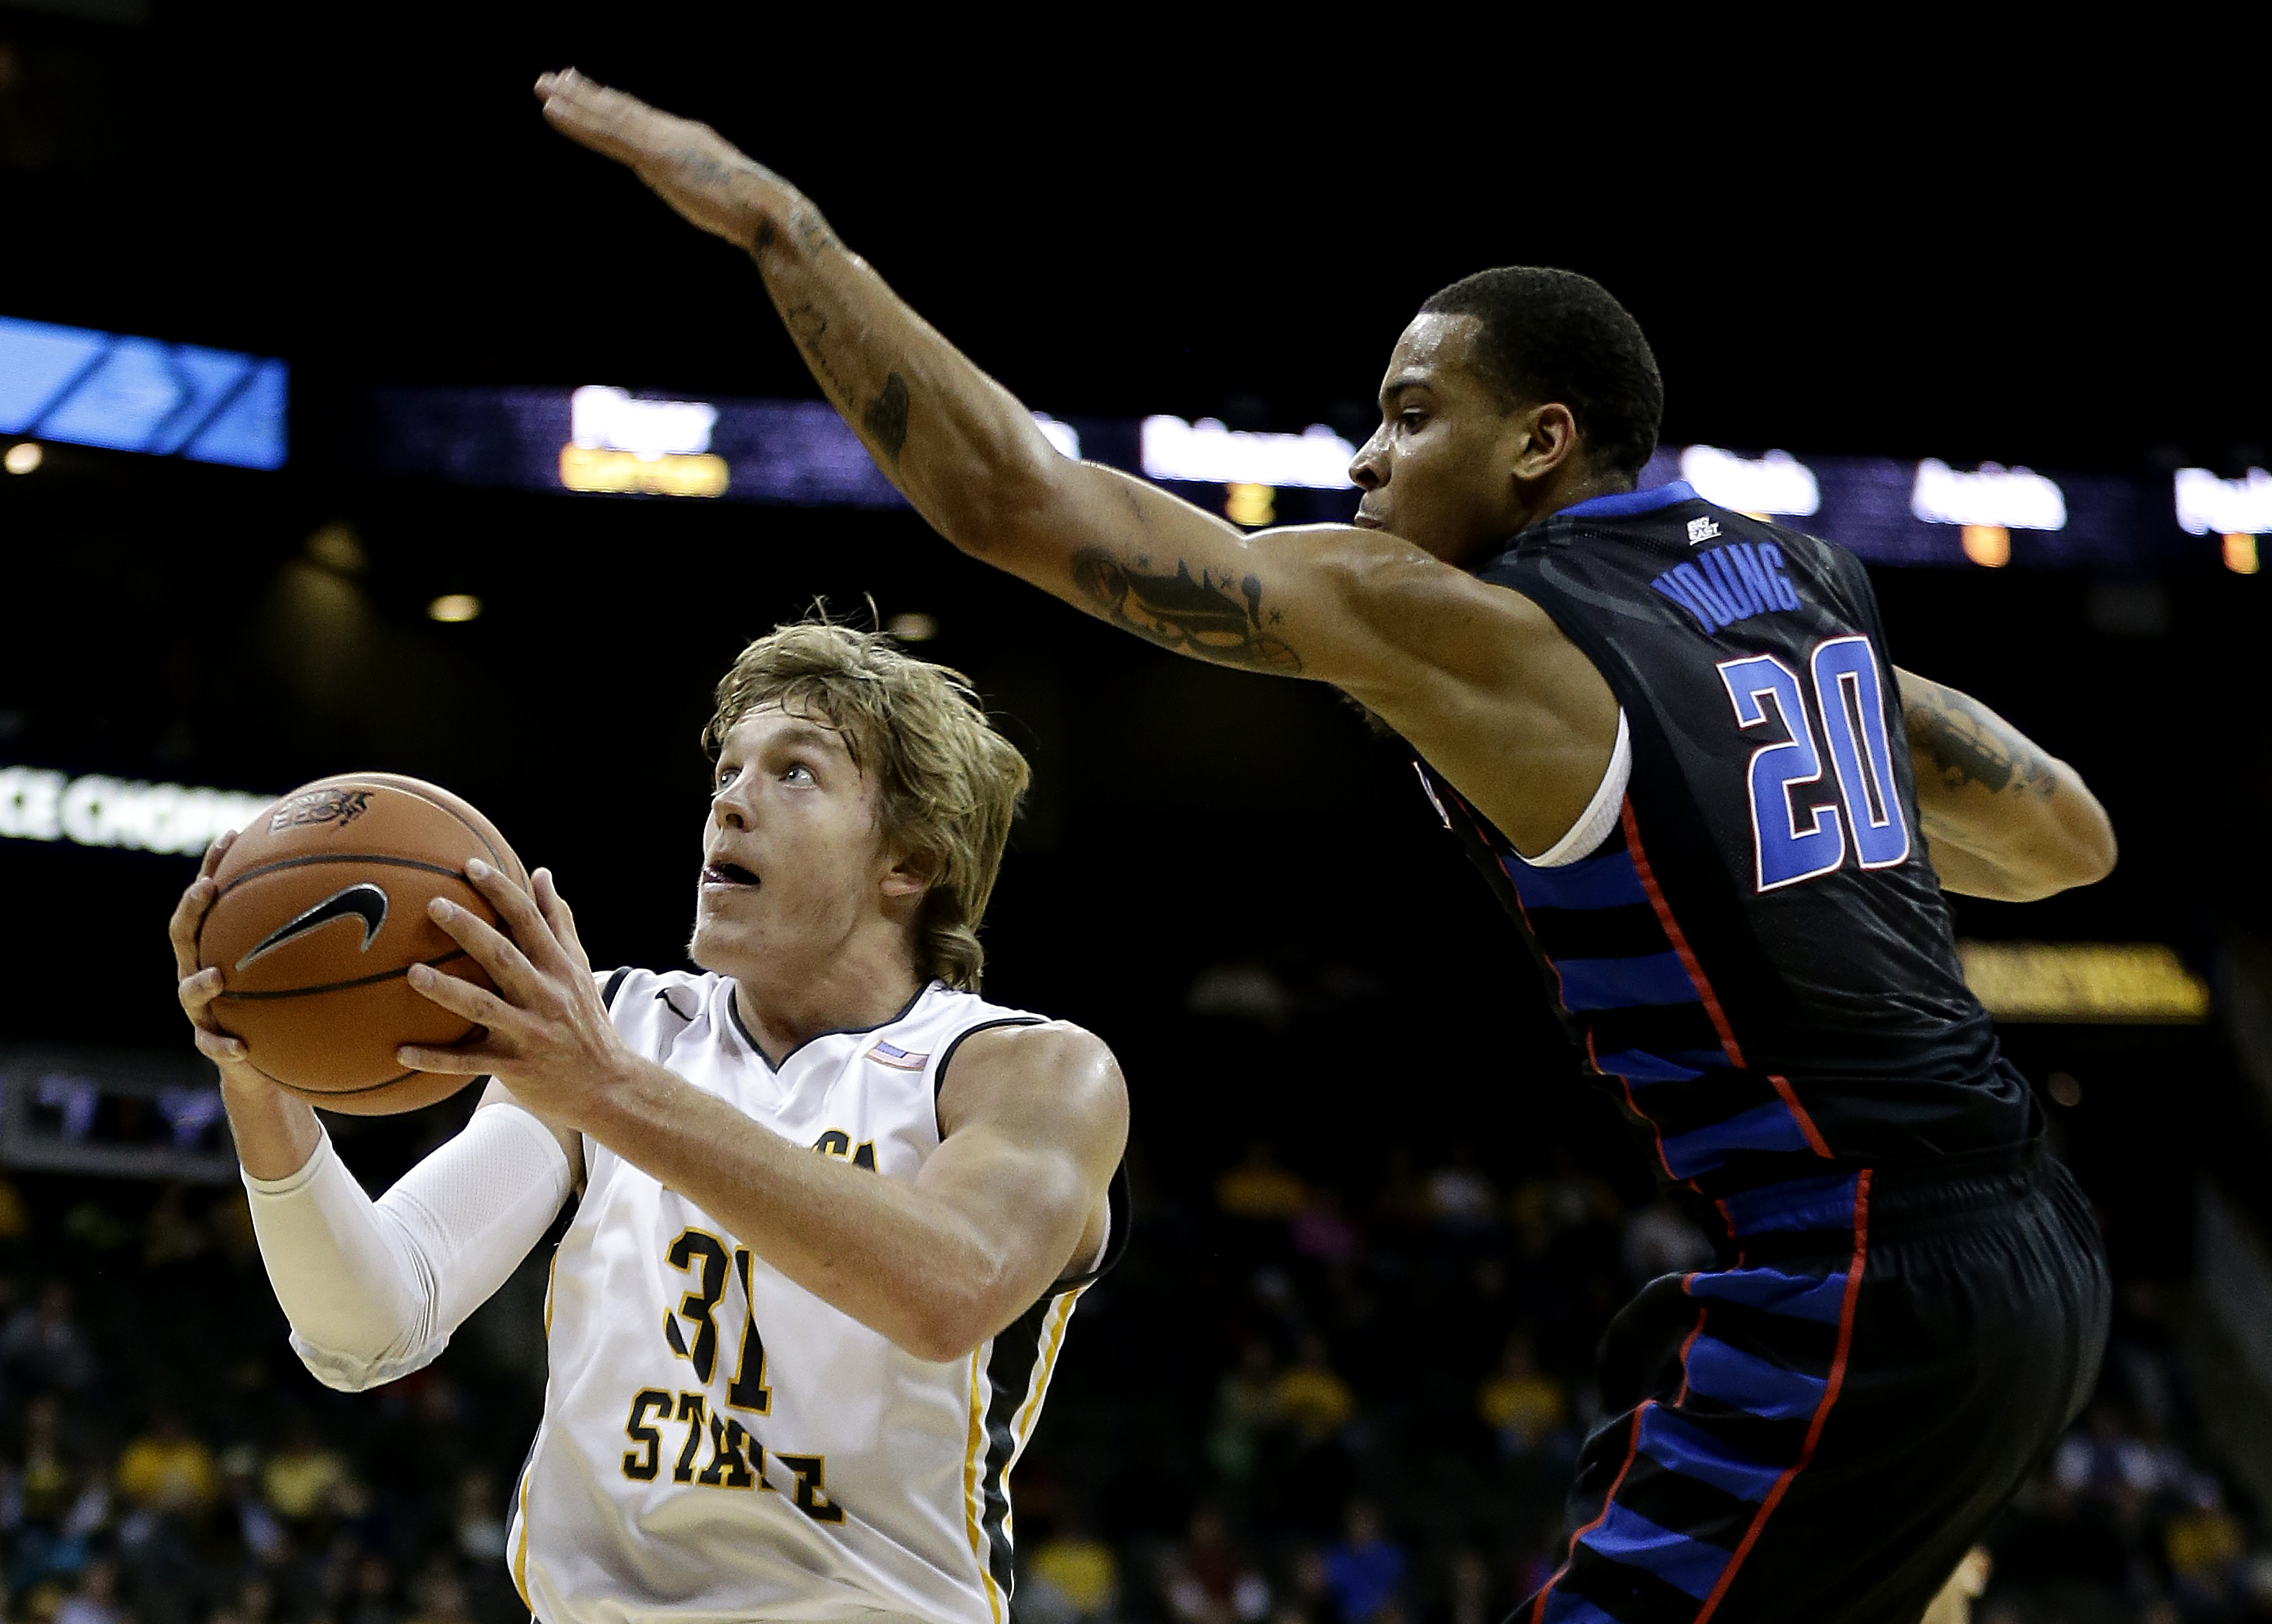 Ron Baker
                              With the trio of Cleathony Early, Fred VanVleet and Ron Baker leading the way, Wichita State became the first team since UNLV in 1991 to finish the regular season undefeated. The Shockers' tournament  fate may rest on Baker's production. The undersized shooting guard, a force in the mid-major Missouri Valley Conference, will likely face more difficult defensive match-ups outside the friendly confines of the Missouri Valley Conference.